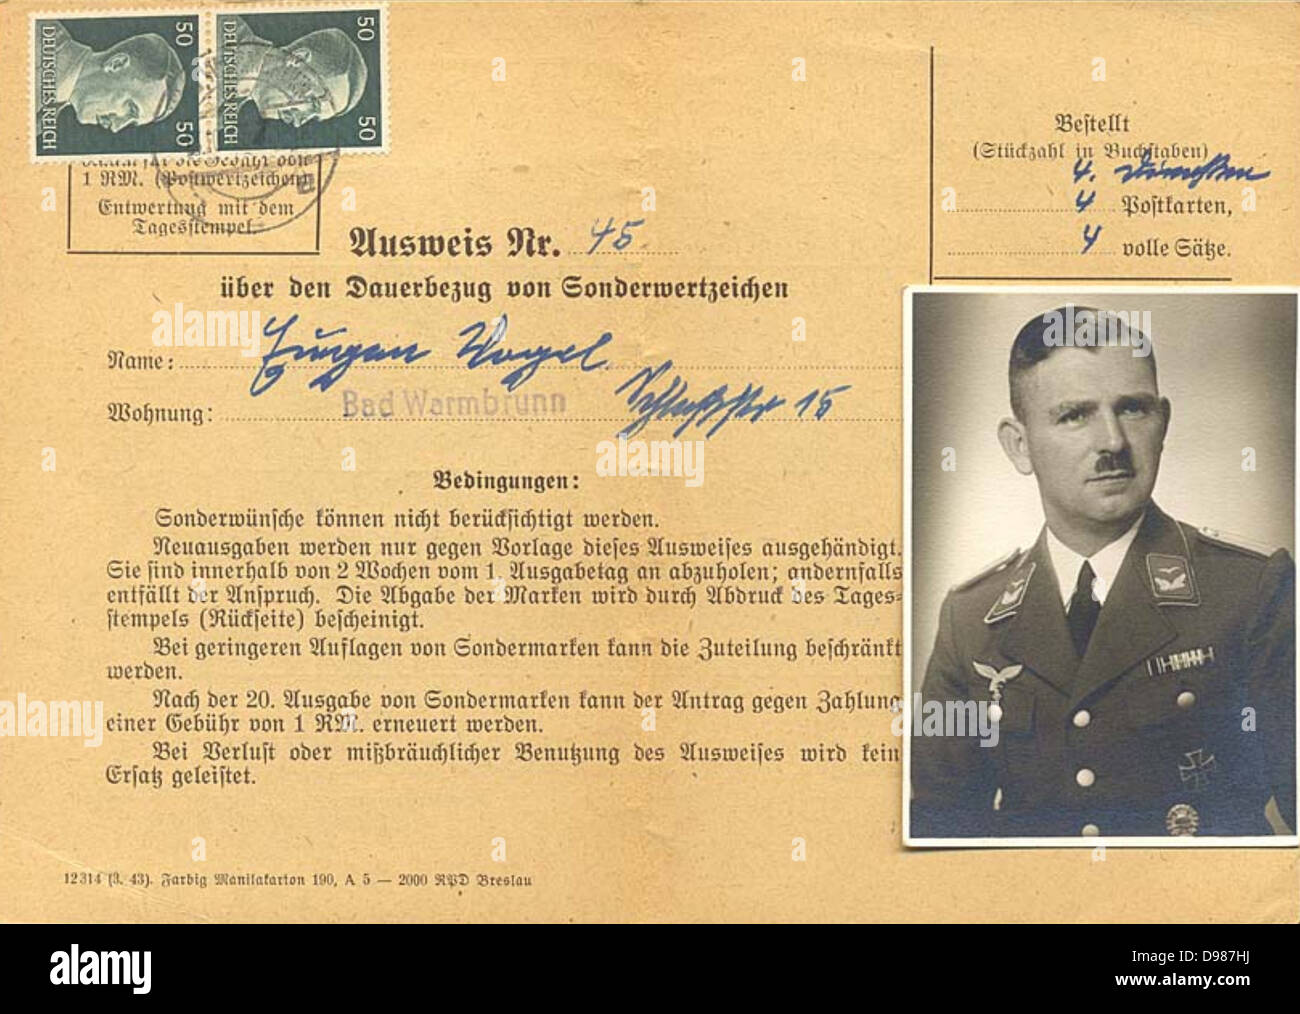 Germany: Pass for continuation of special benefits for Luftwaffe officer shown in the photograph. Document, issued in Bad Warmbrunn in 1943, is authenticated by two franked 50 phenig stamps showing Hitler's head. Stock Photo